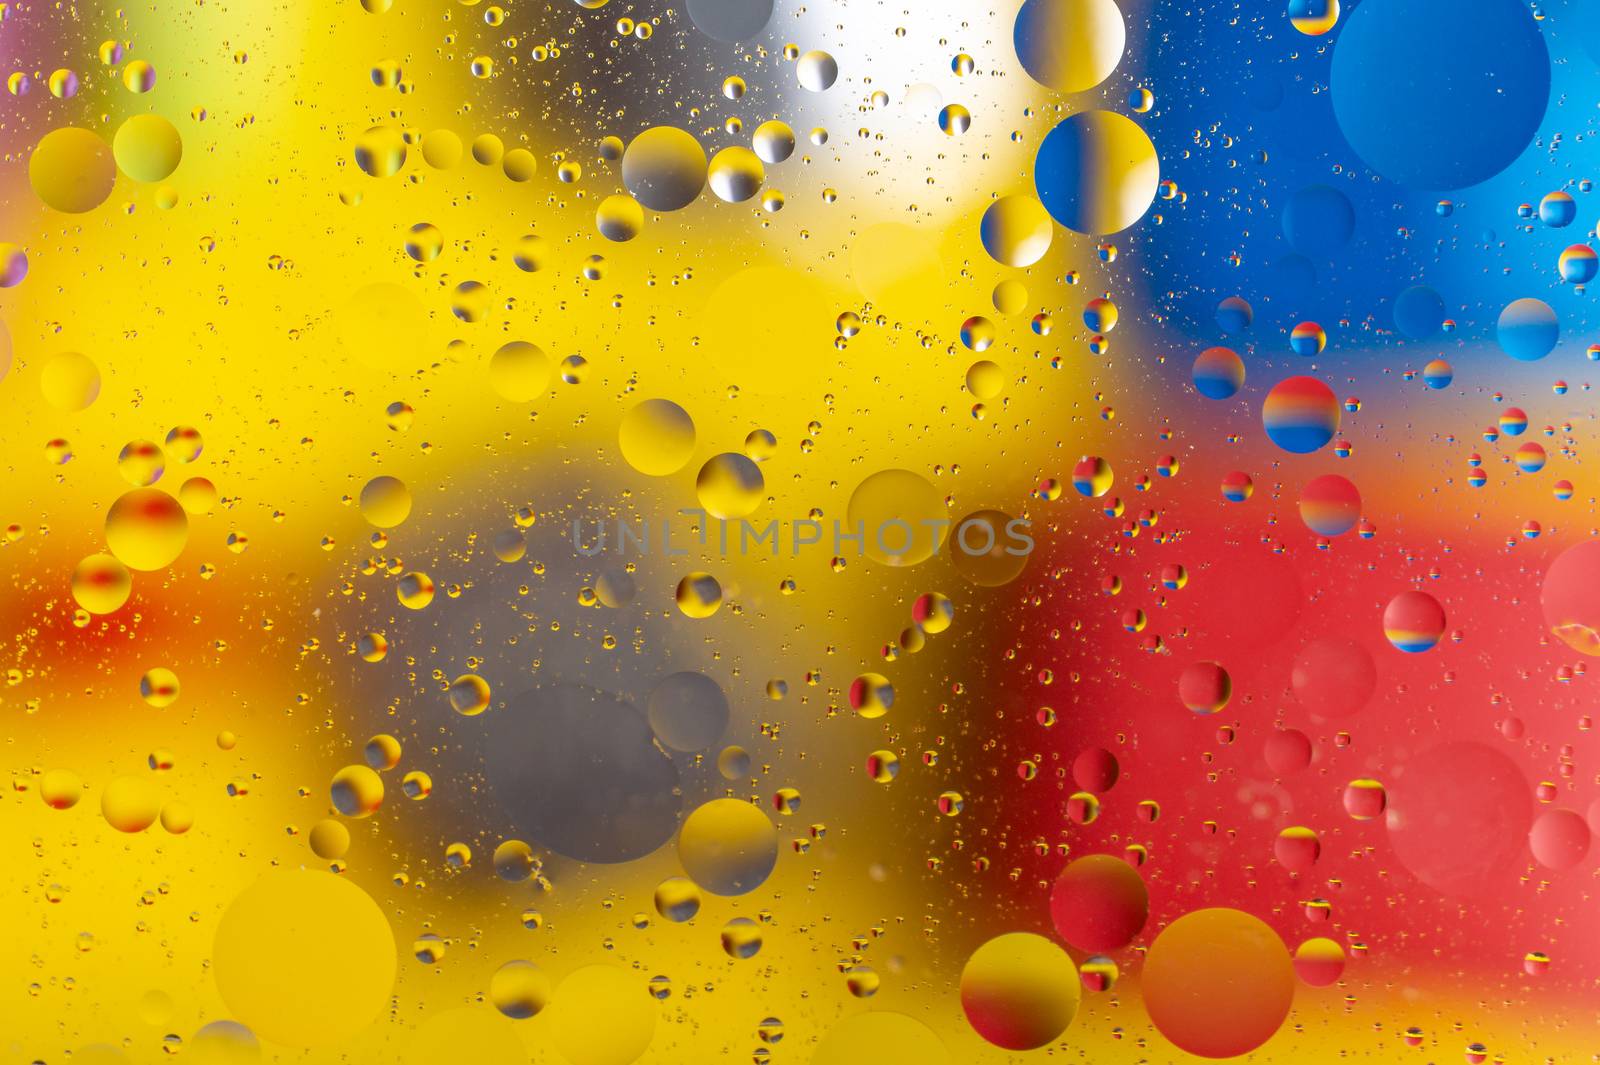 The abstract composition with oil drops in water. The abstract composition with oil drops in water. Many round drops on water surface.